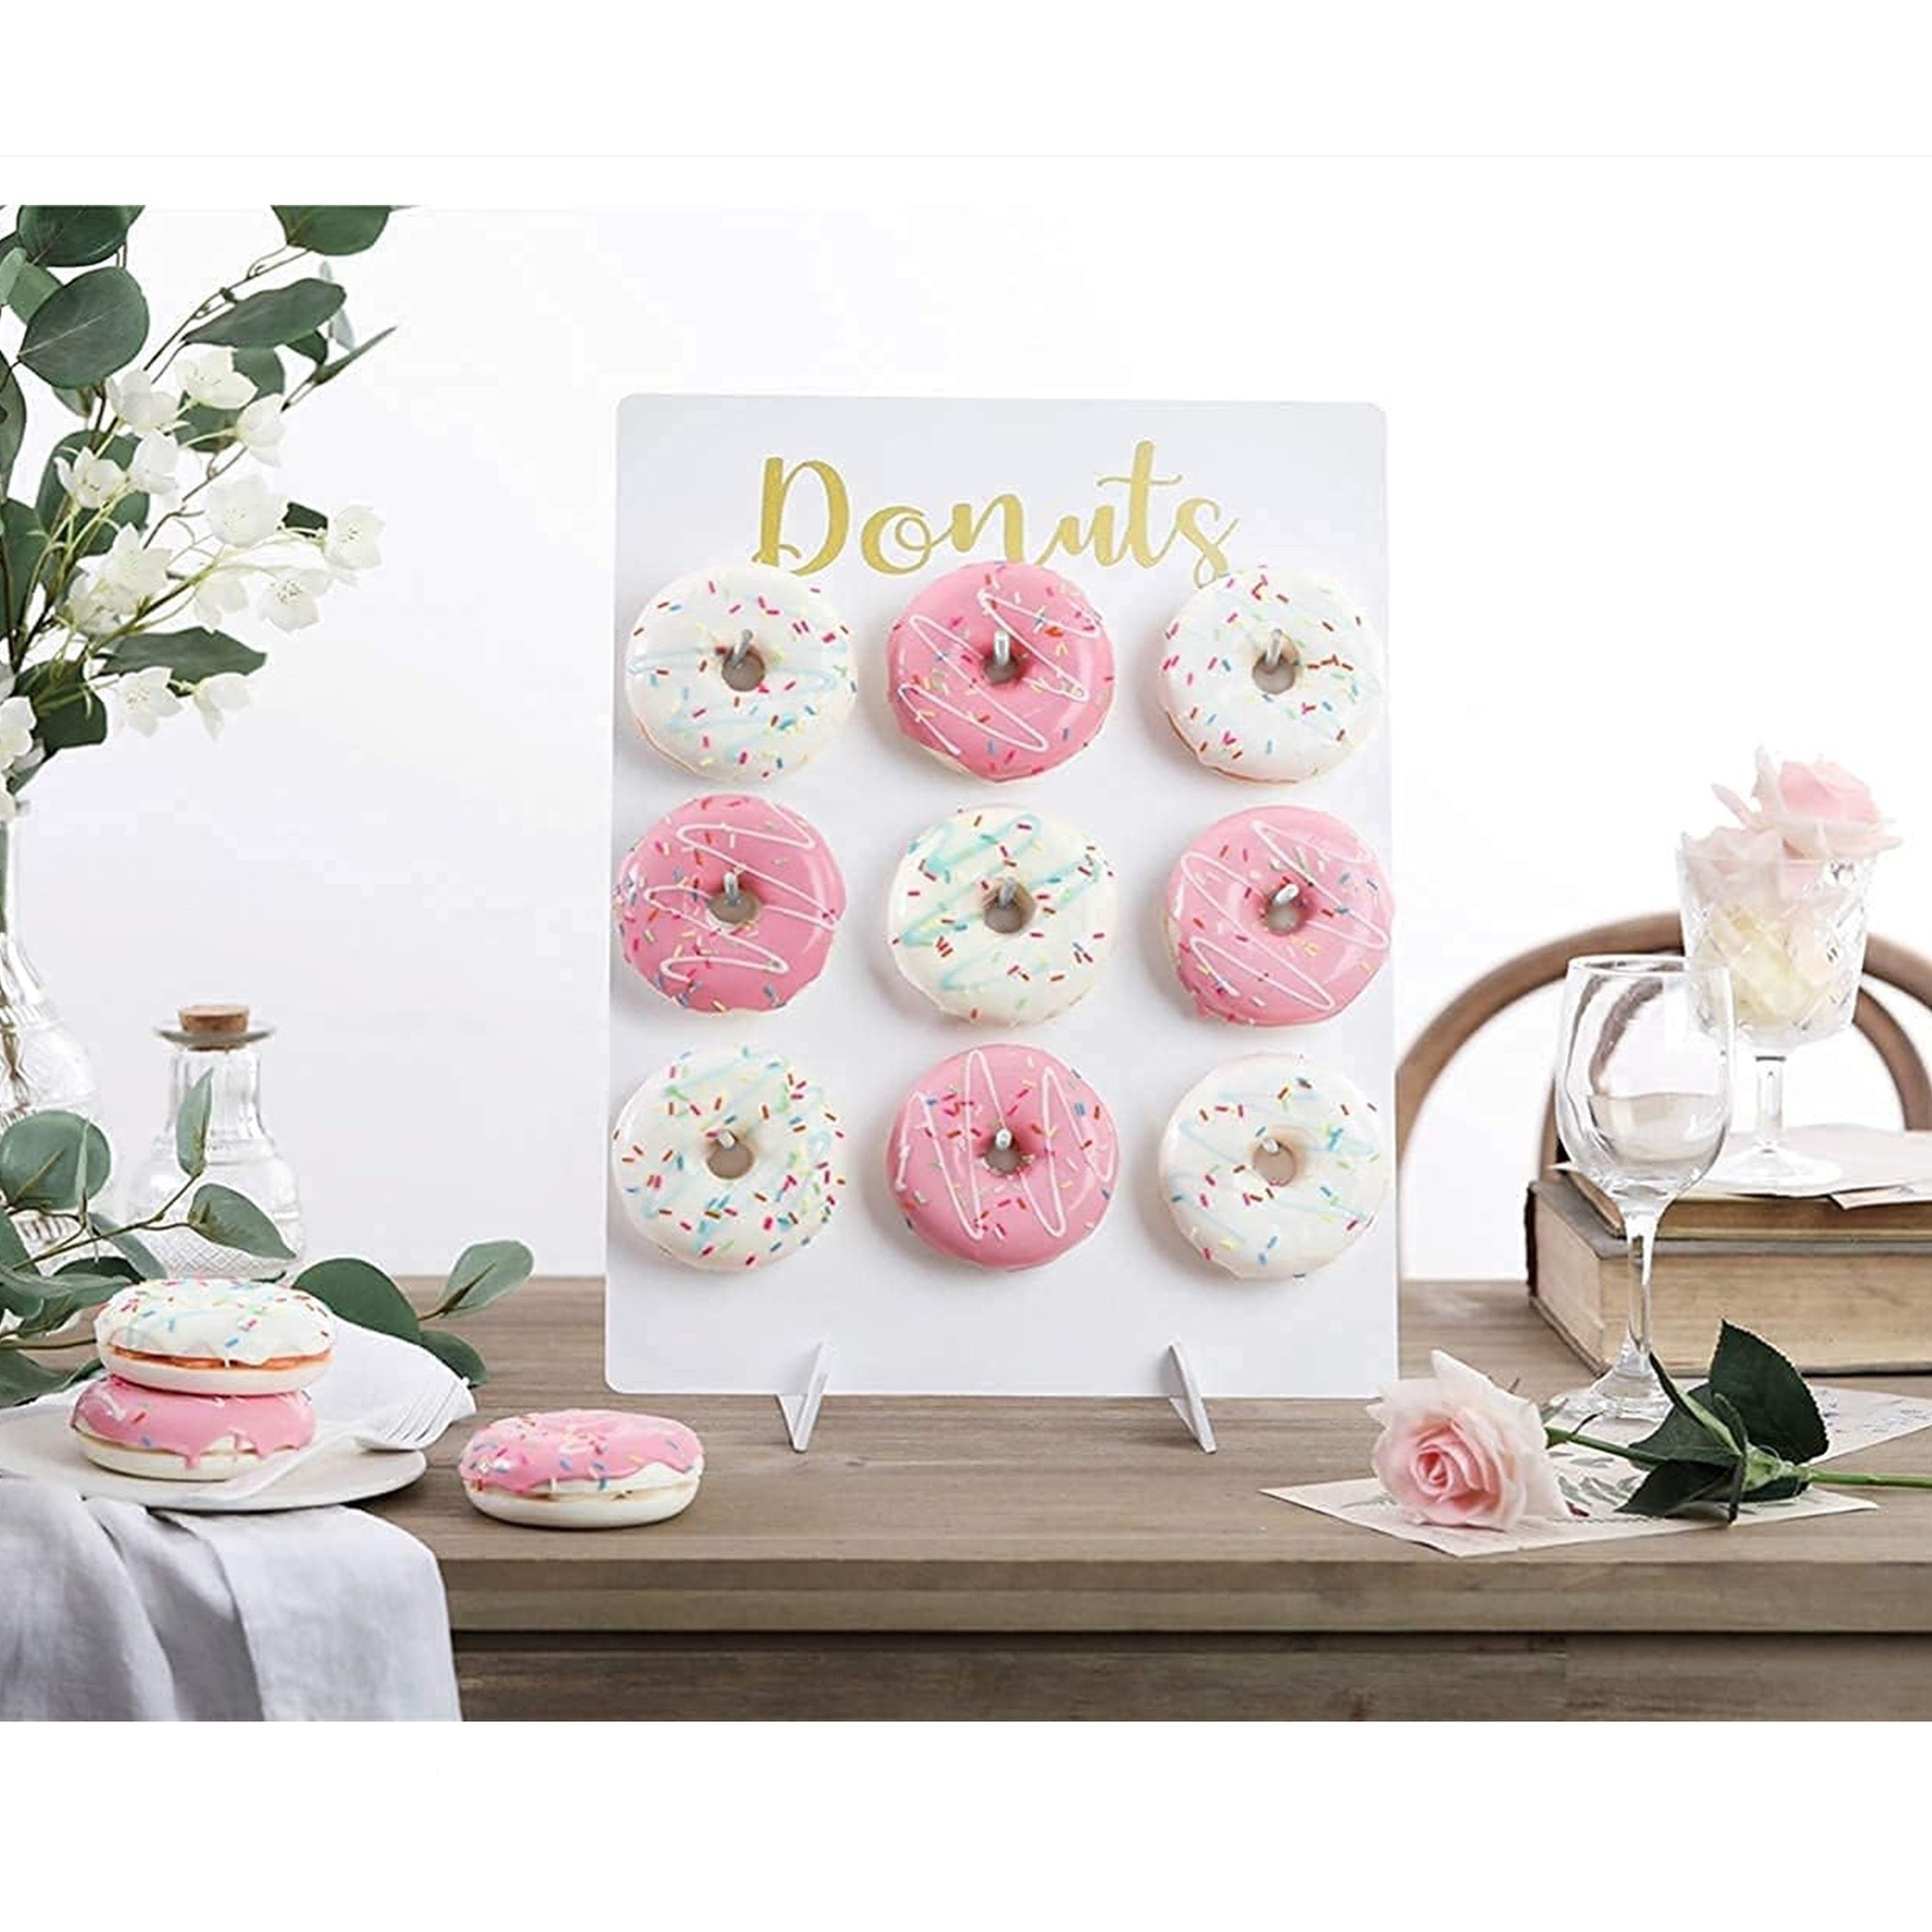 

Wooden Donut Display Stand With 9 Pegs - Rustic Reusable Donut Board Holder For Parties, Weddings, Baby Showers, Bridal Showers - Food Contact Safe Bakeware